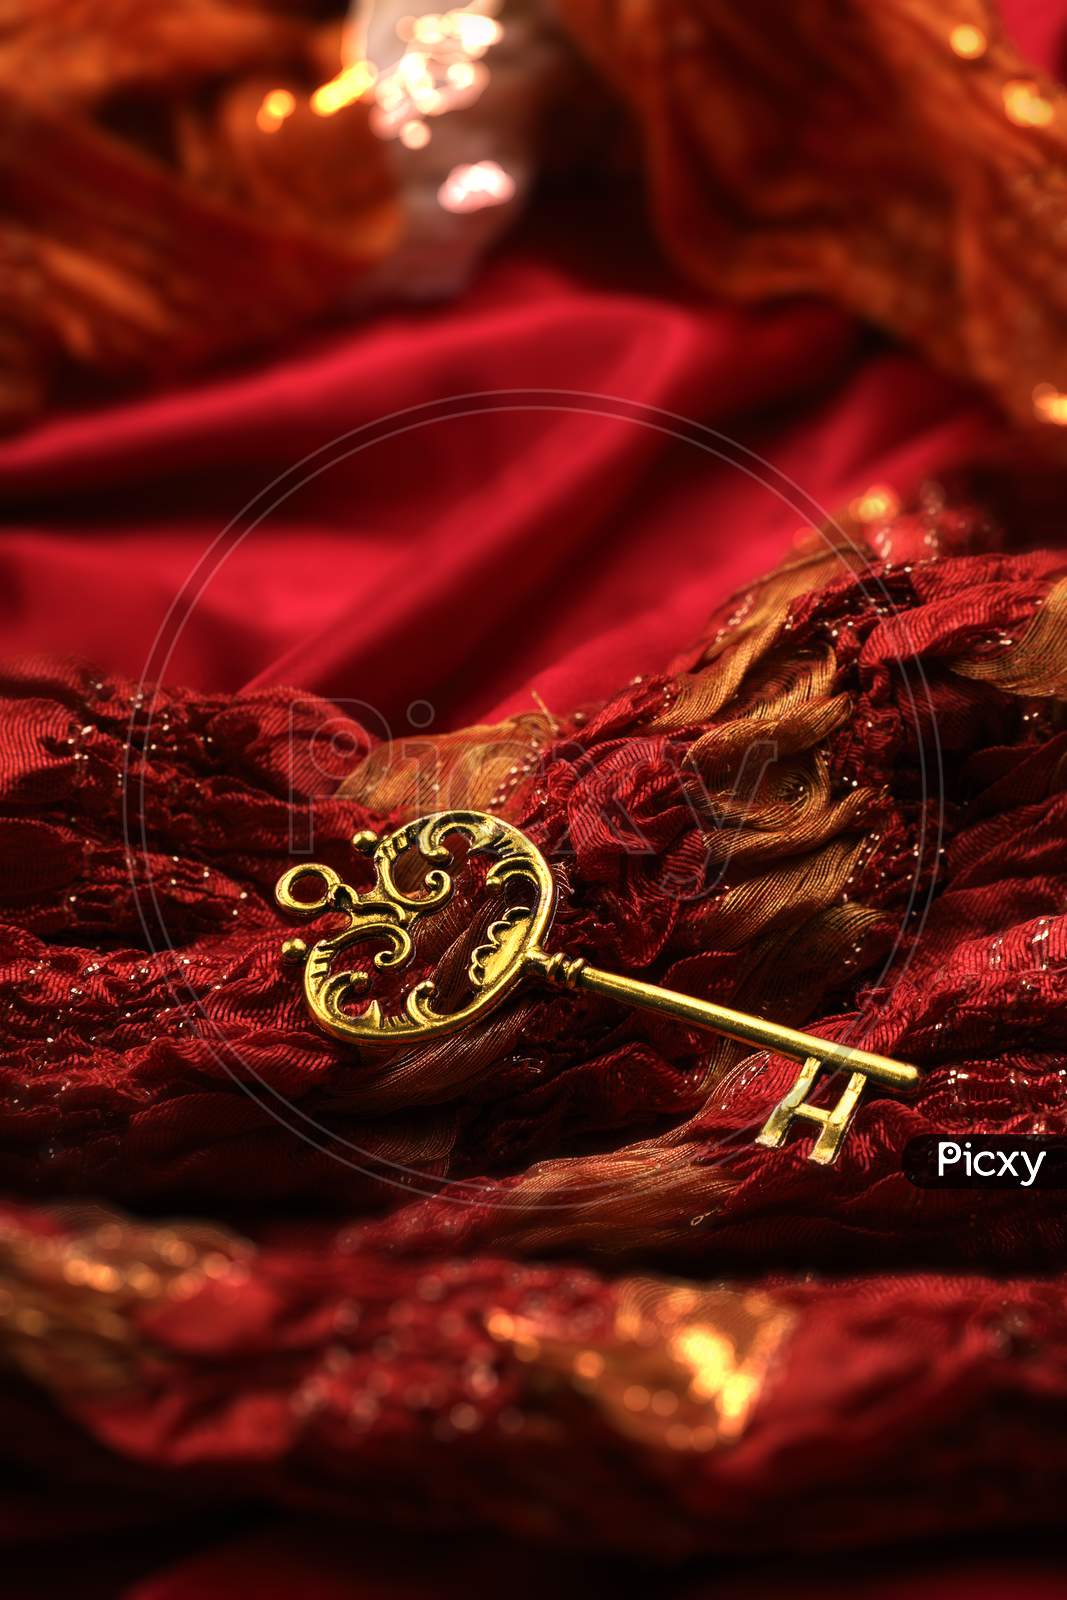 Antique Golden Key On Red Fabric Background